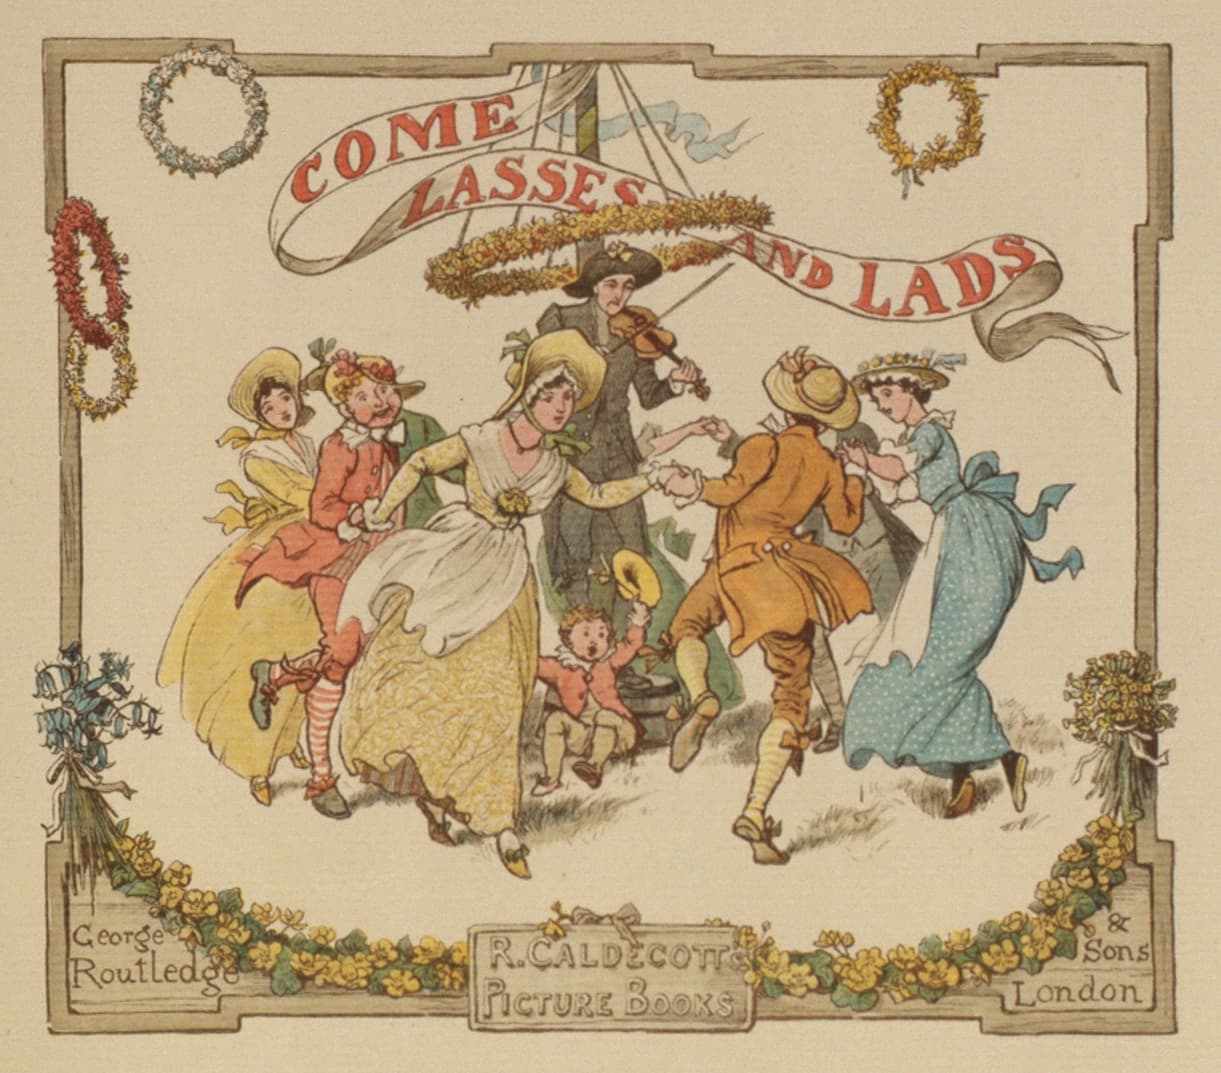 Front cover of Come Lasses and Lads (page 397 of The Complete Collection of PICTURES and SONGS)